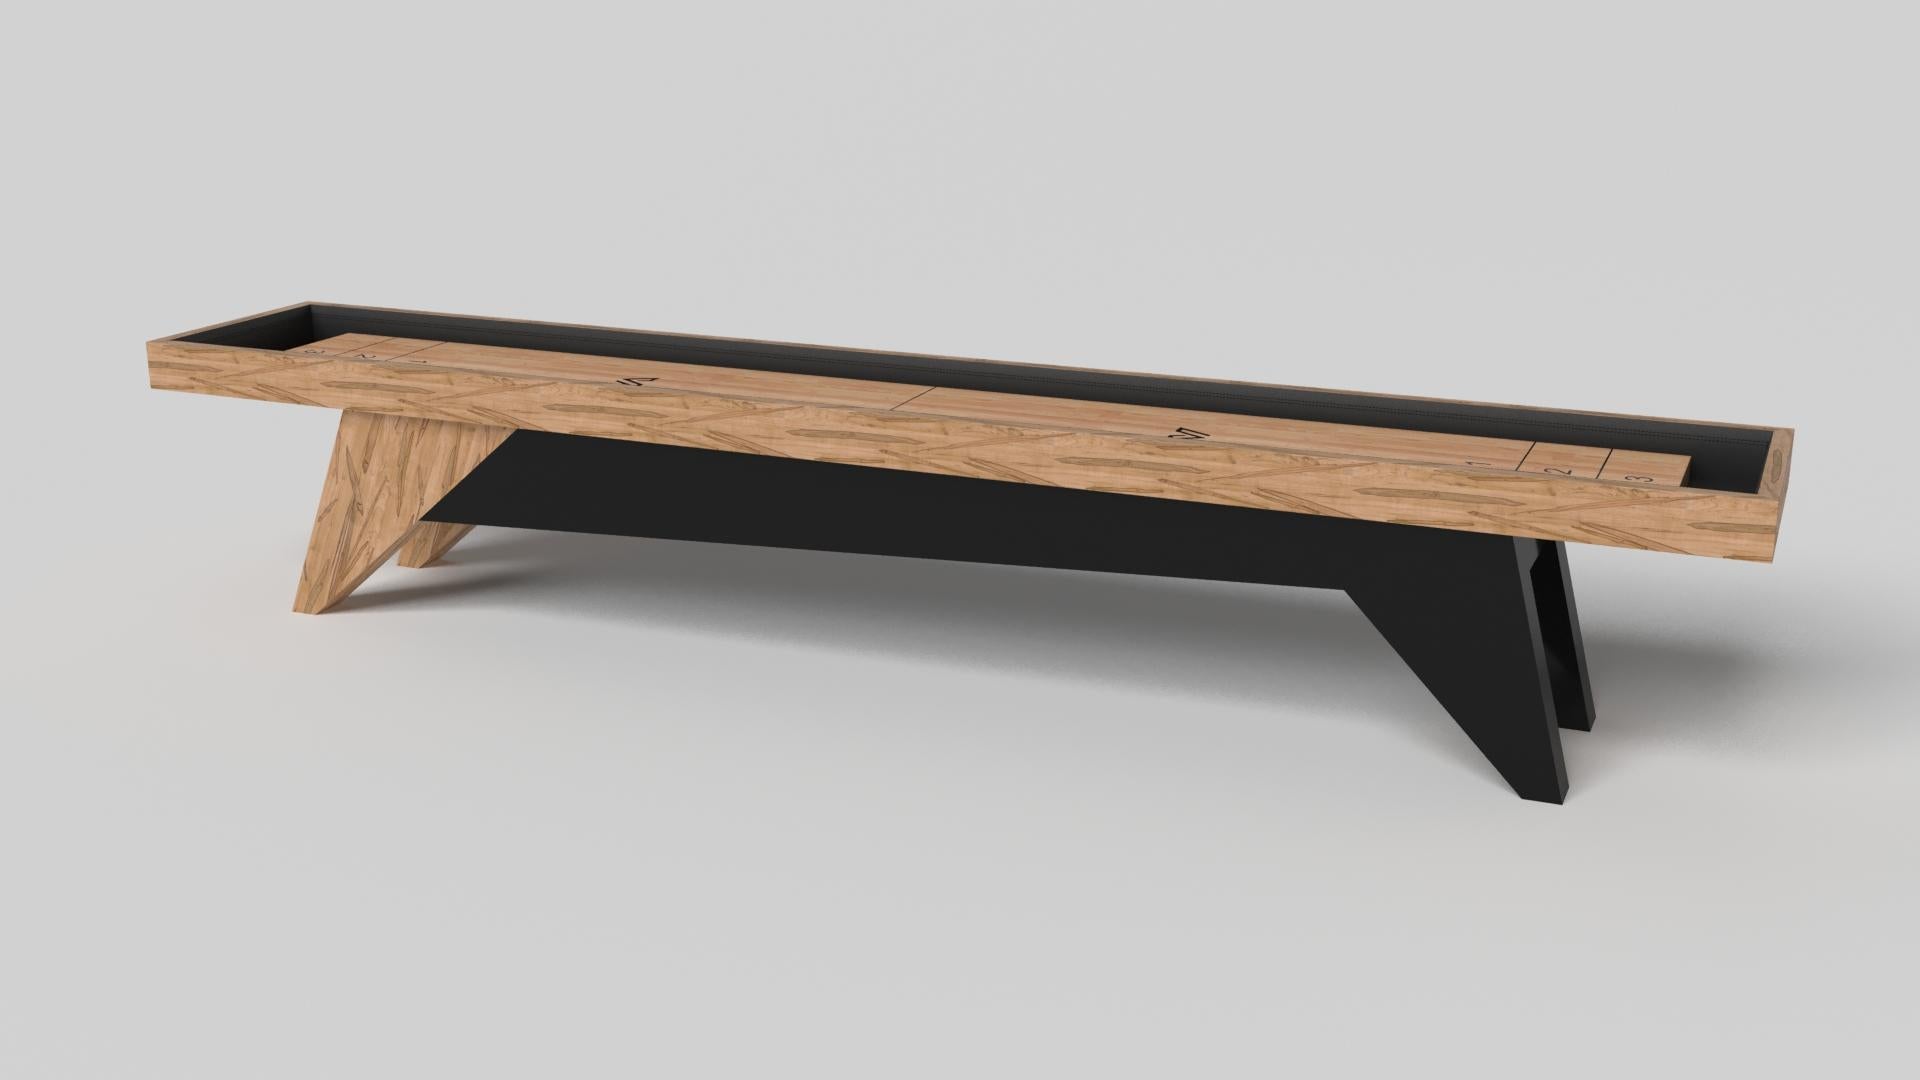 Simple yet sophisticated, the Mantis shuffleboard table puts a fresh, modern spin on a classic four-legged design. Sharp angles and tapered legs provide sleek stability.

Size:

12 Foot - 144”X32”X34”
Playing Area Of 128”X20”